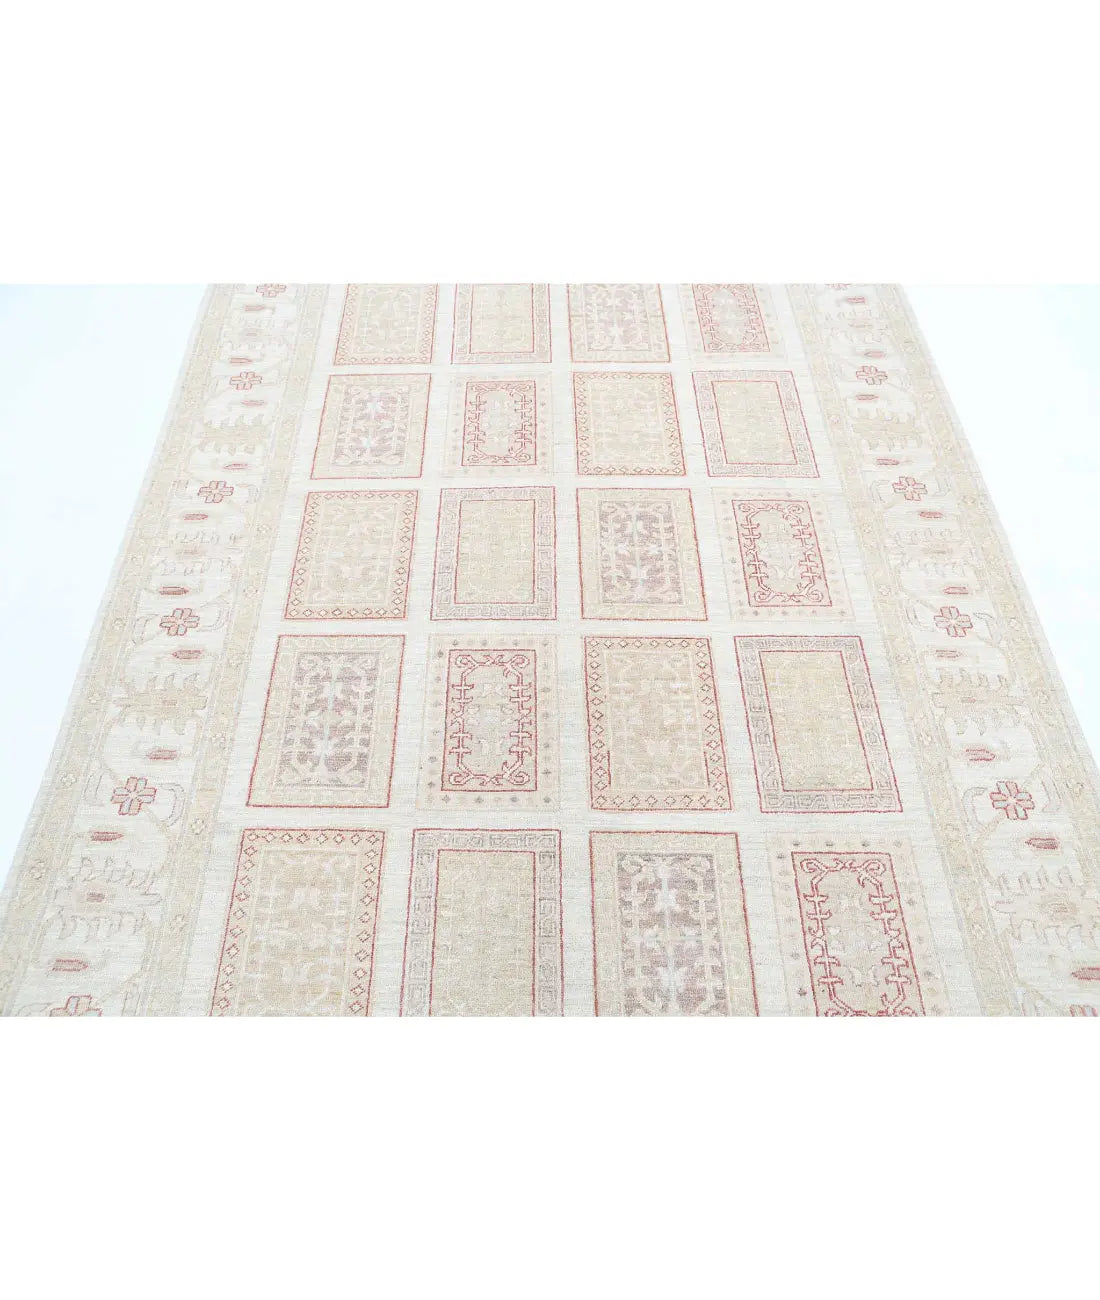 Hand Knotted Serenity Wool Rug - 5'6'' x 7'11''